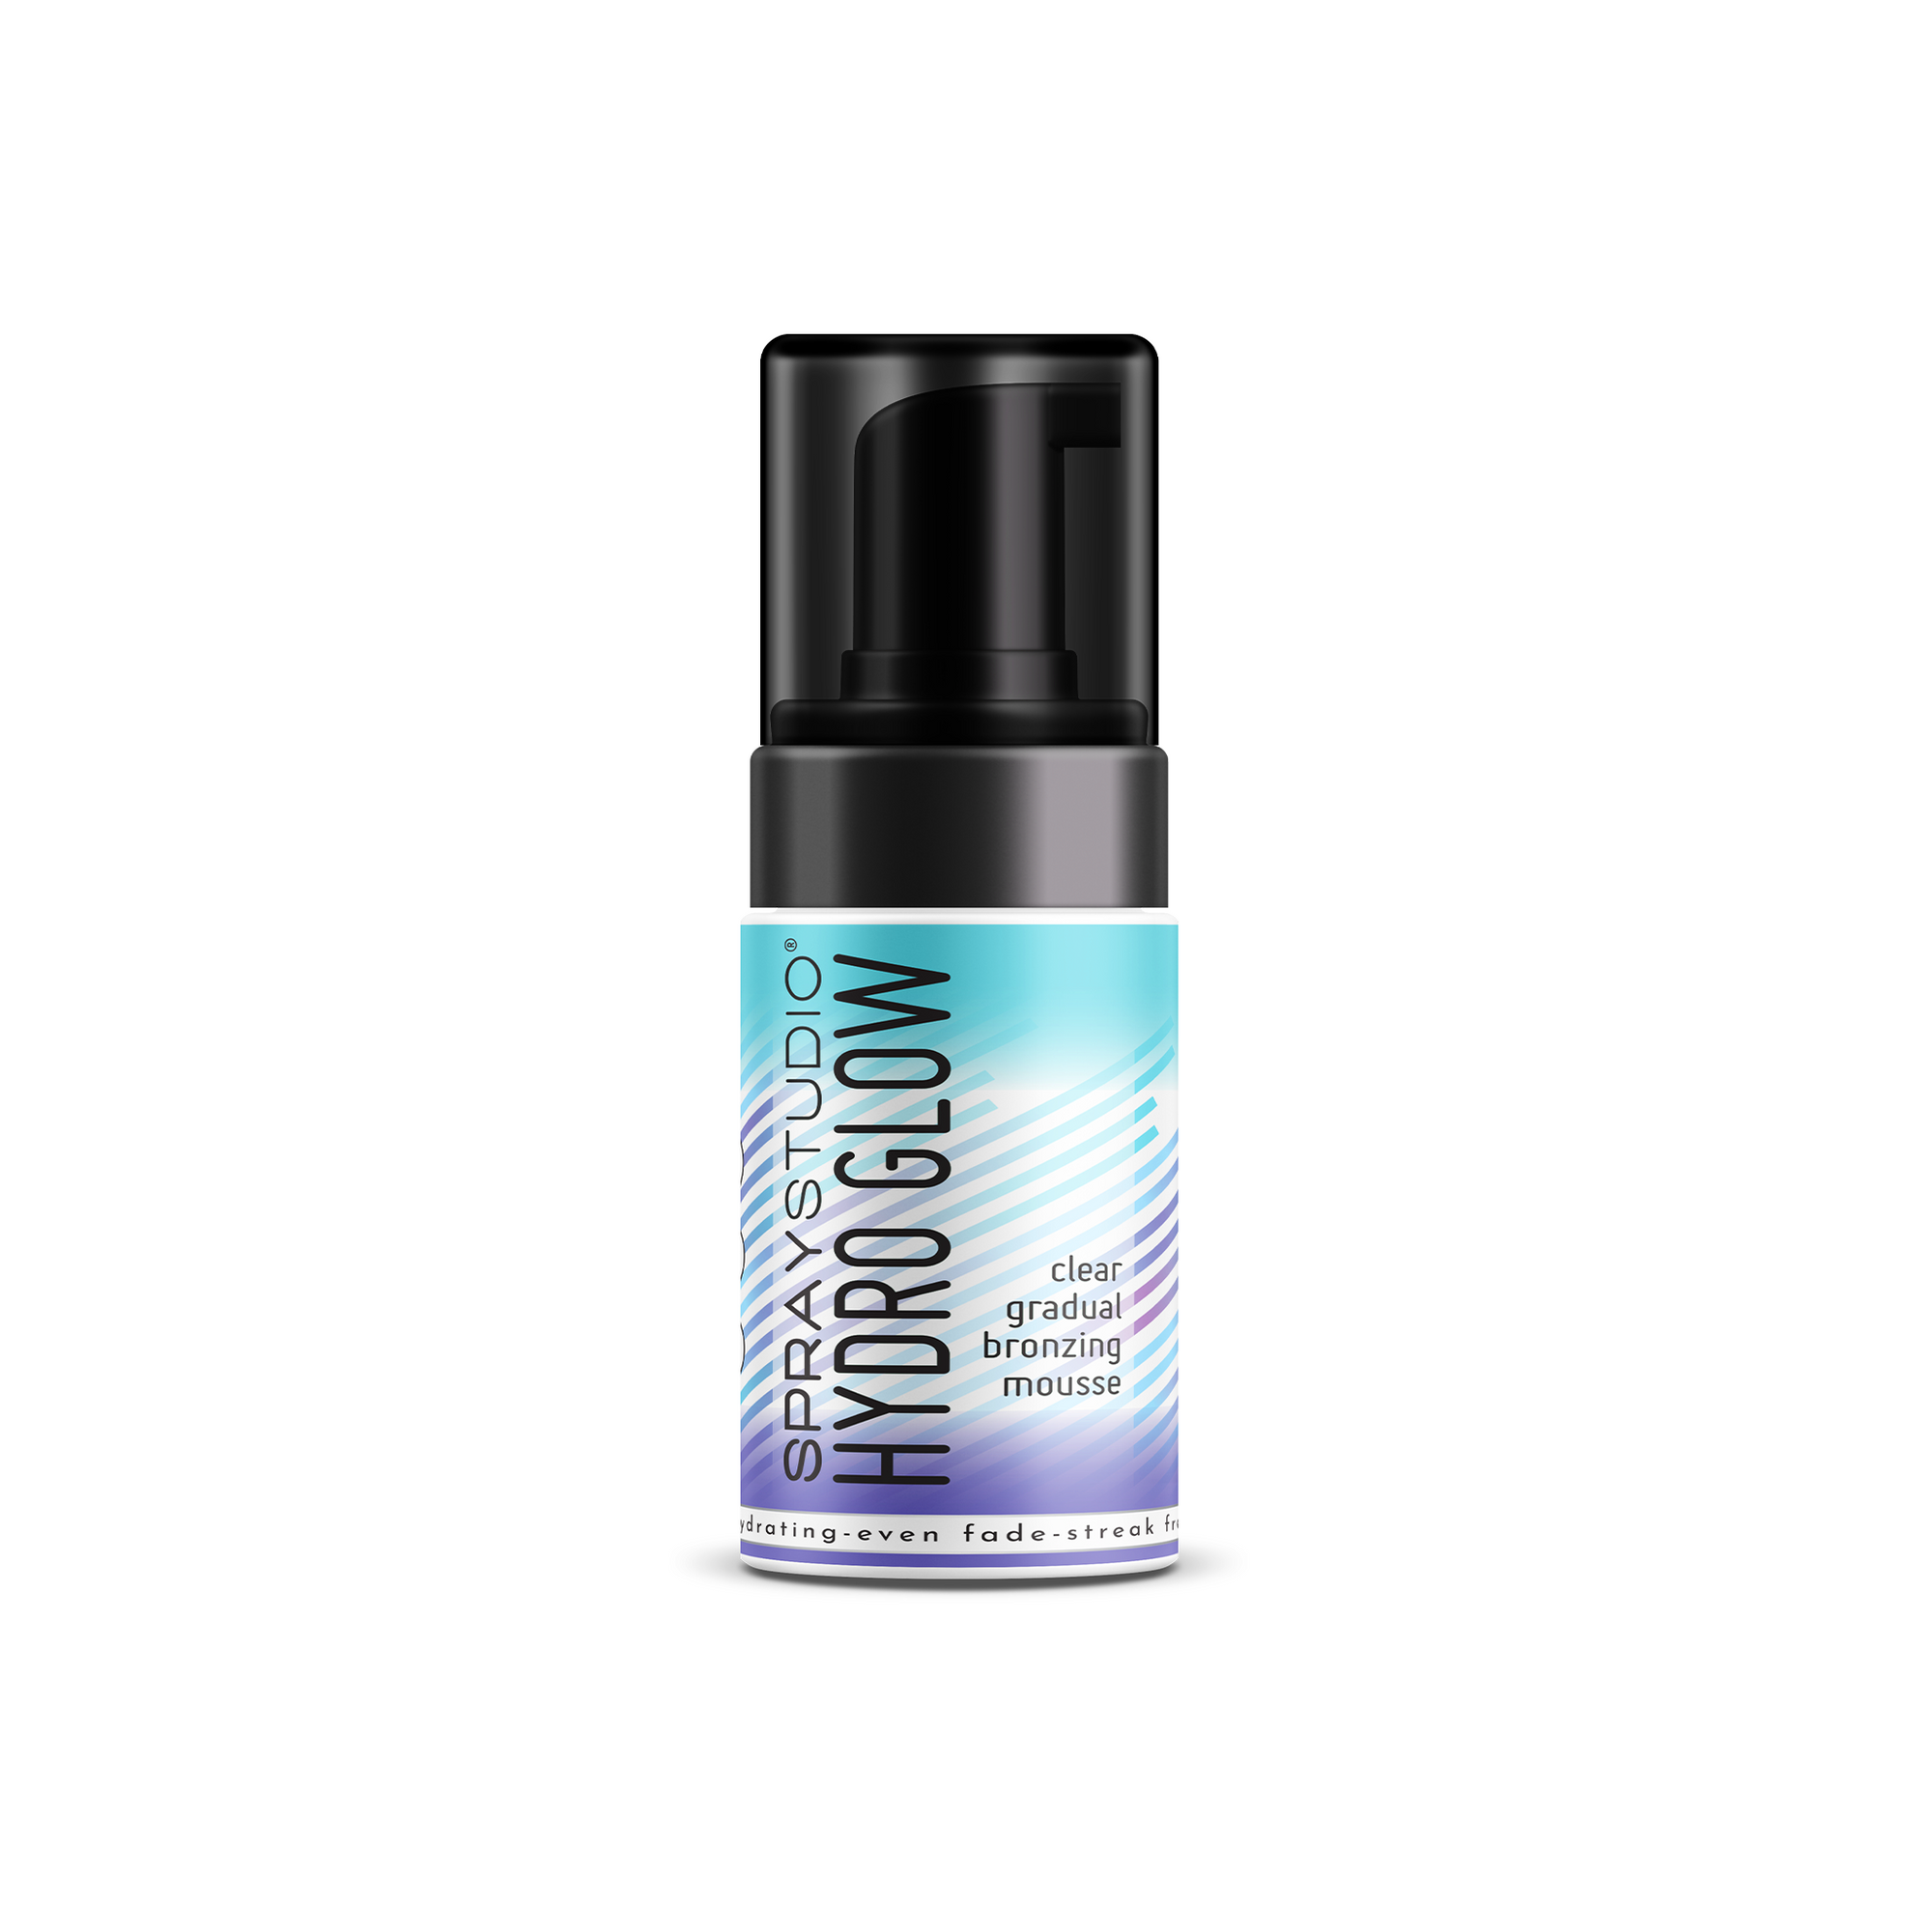 Spray Studio Gradual Tanning Clear Mousse Travel Sized